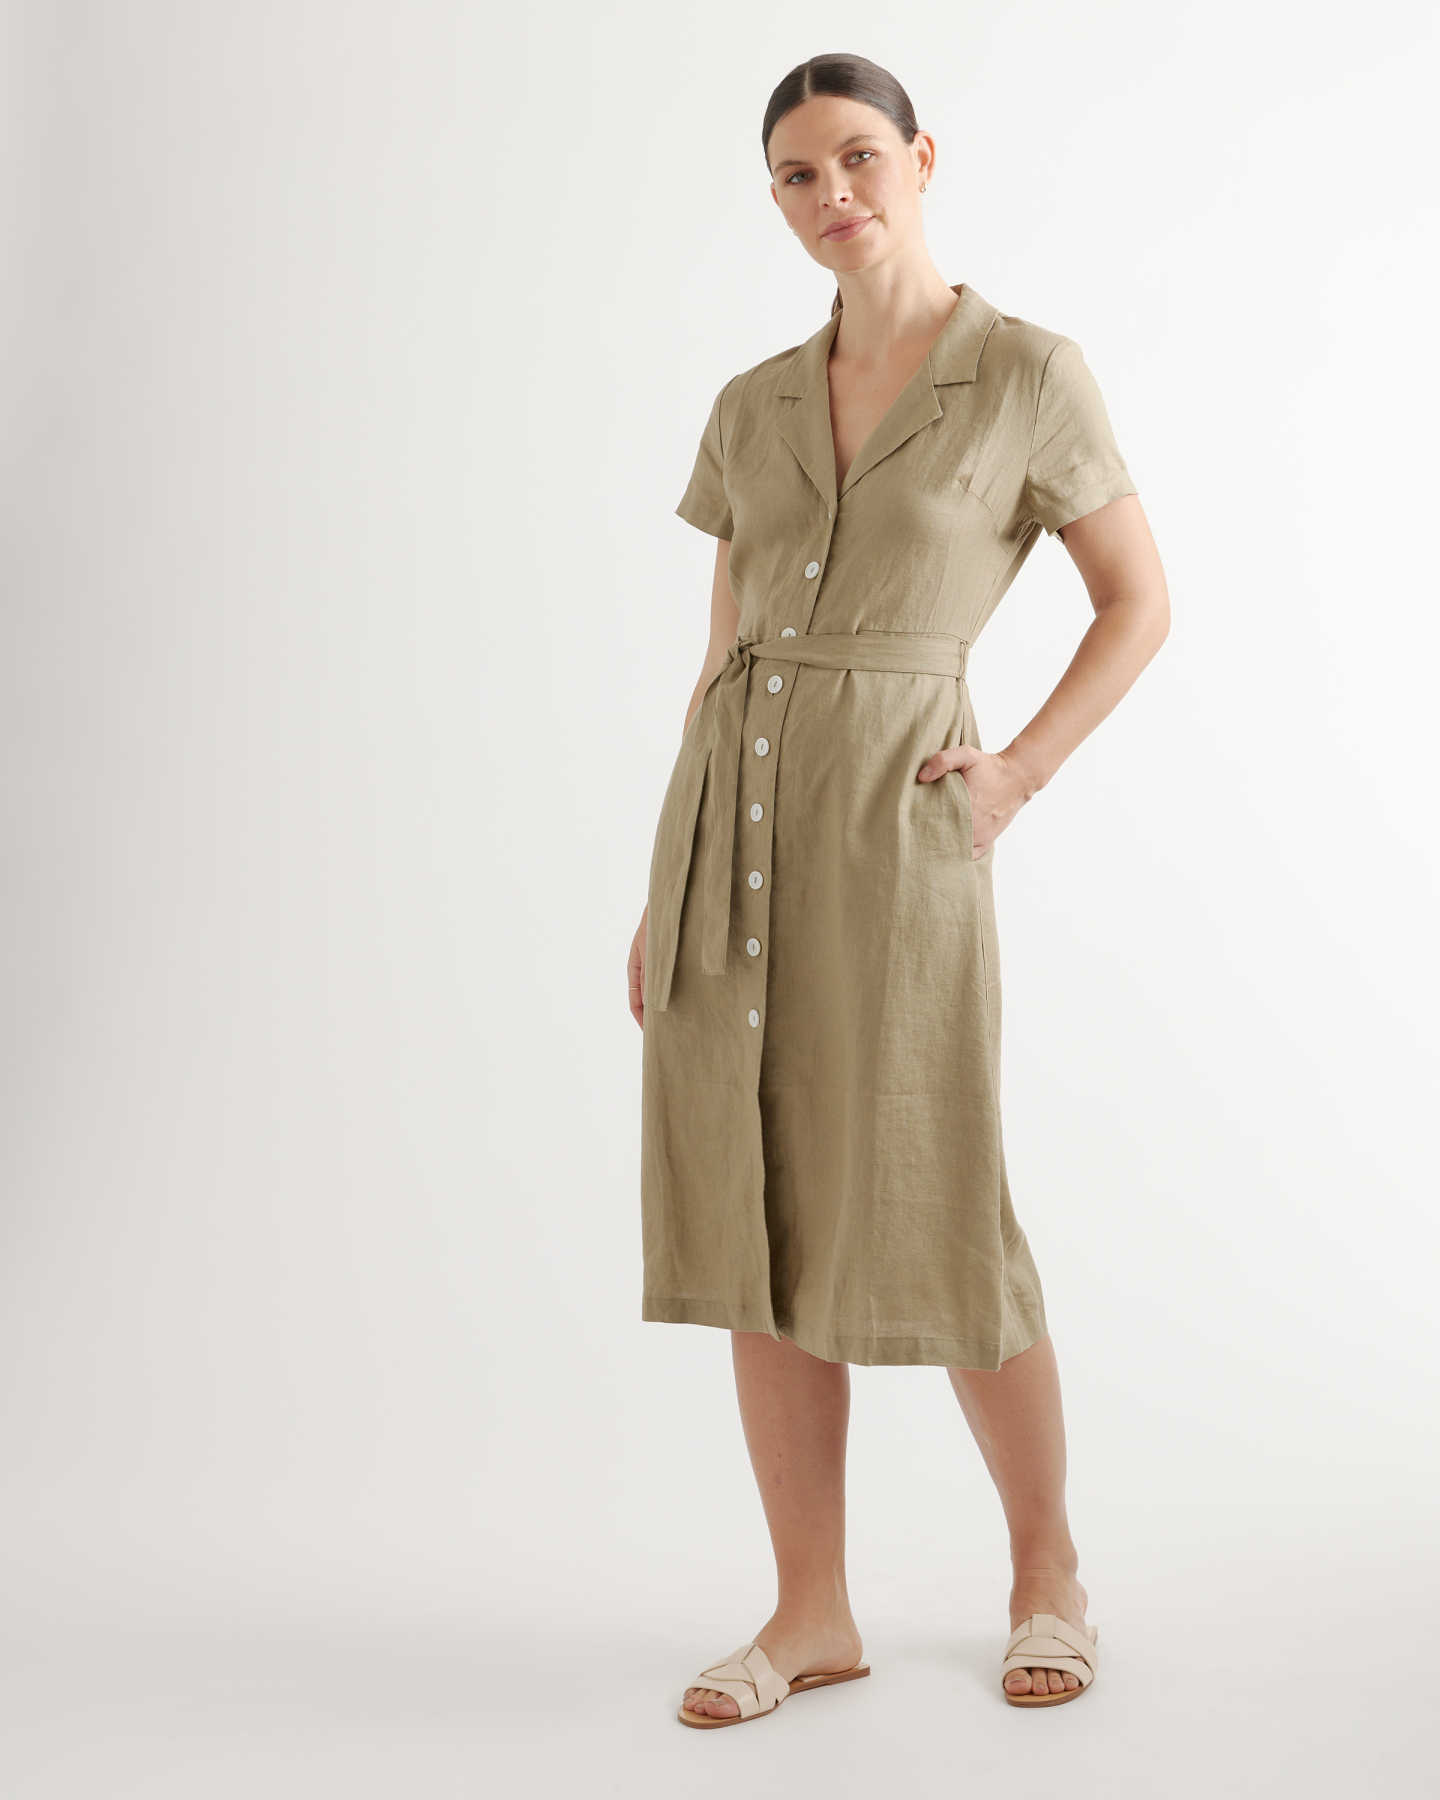 100% European Linen Button Front Dress - Washed Olive - 3